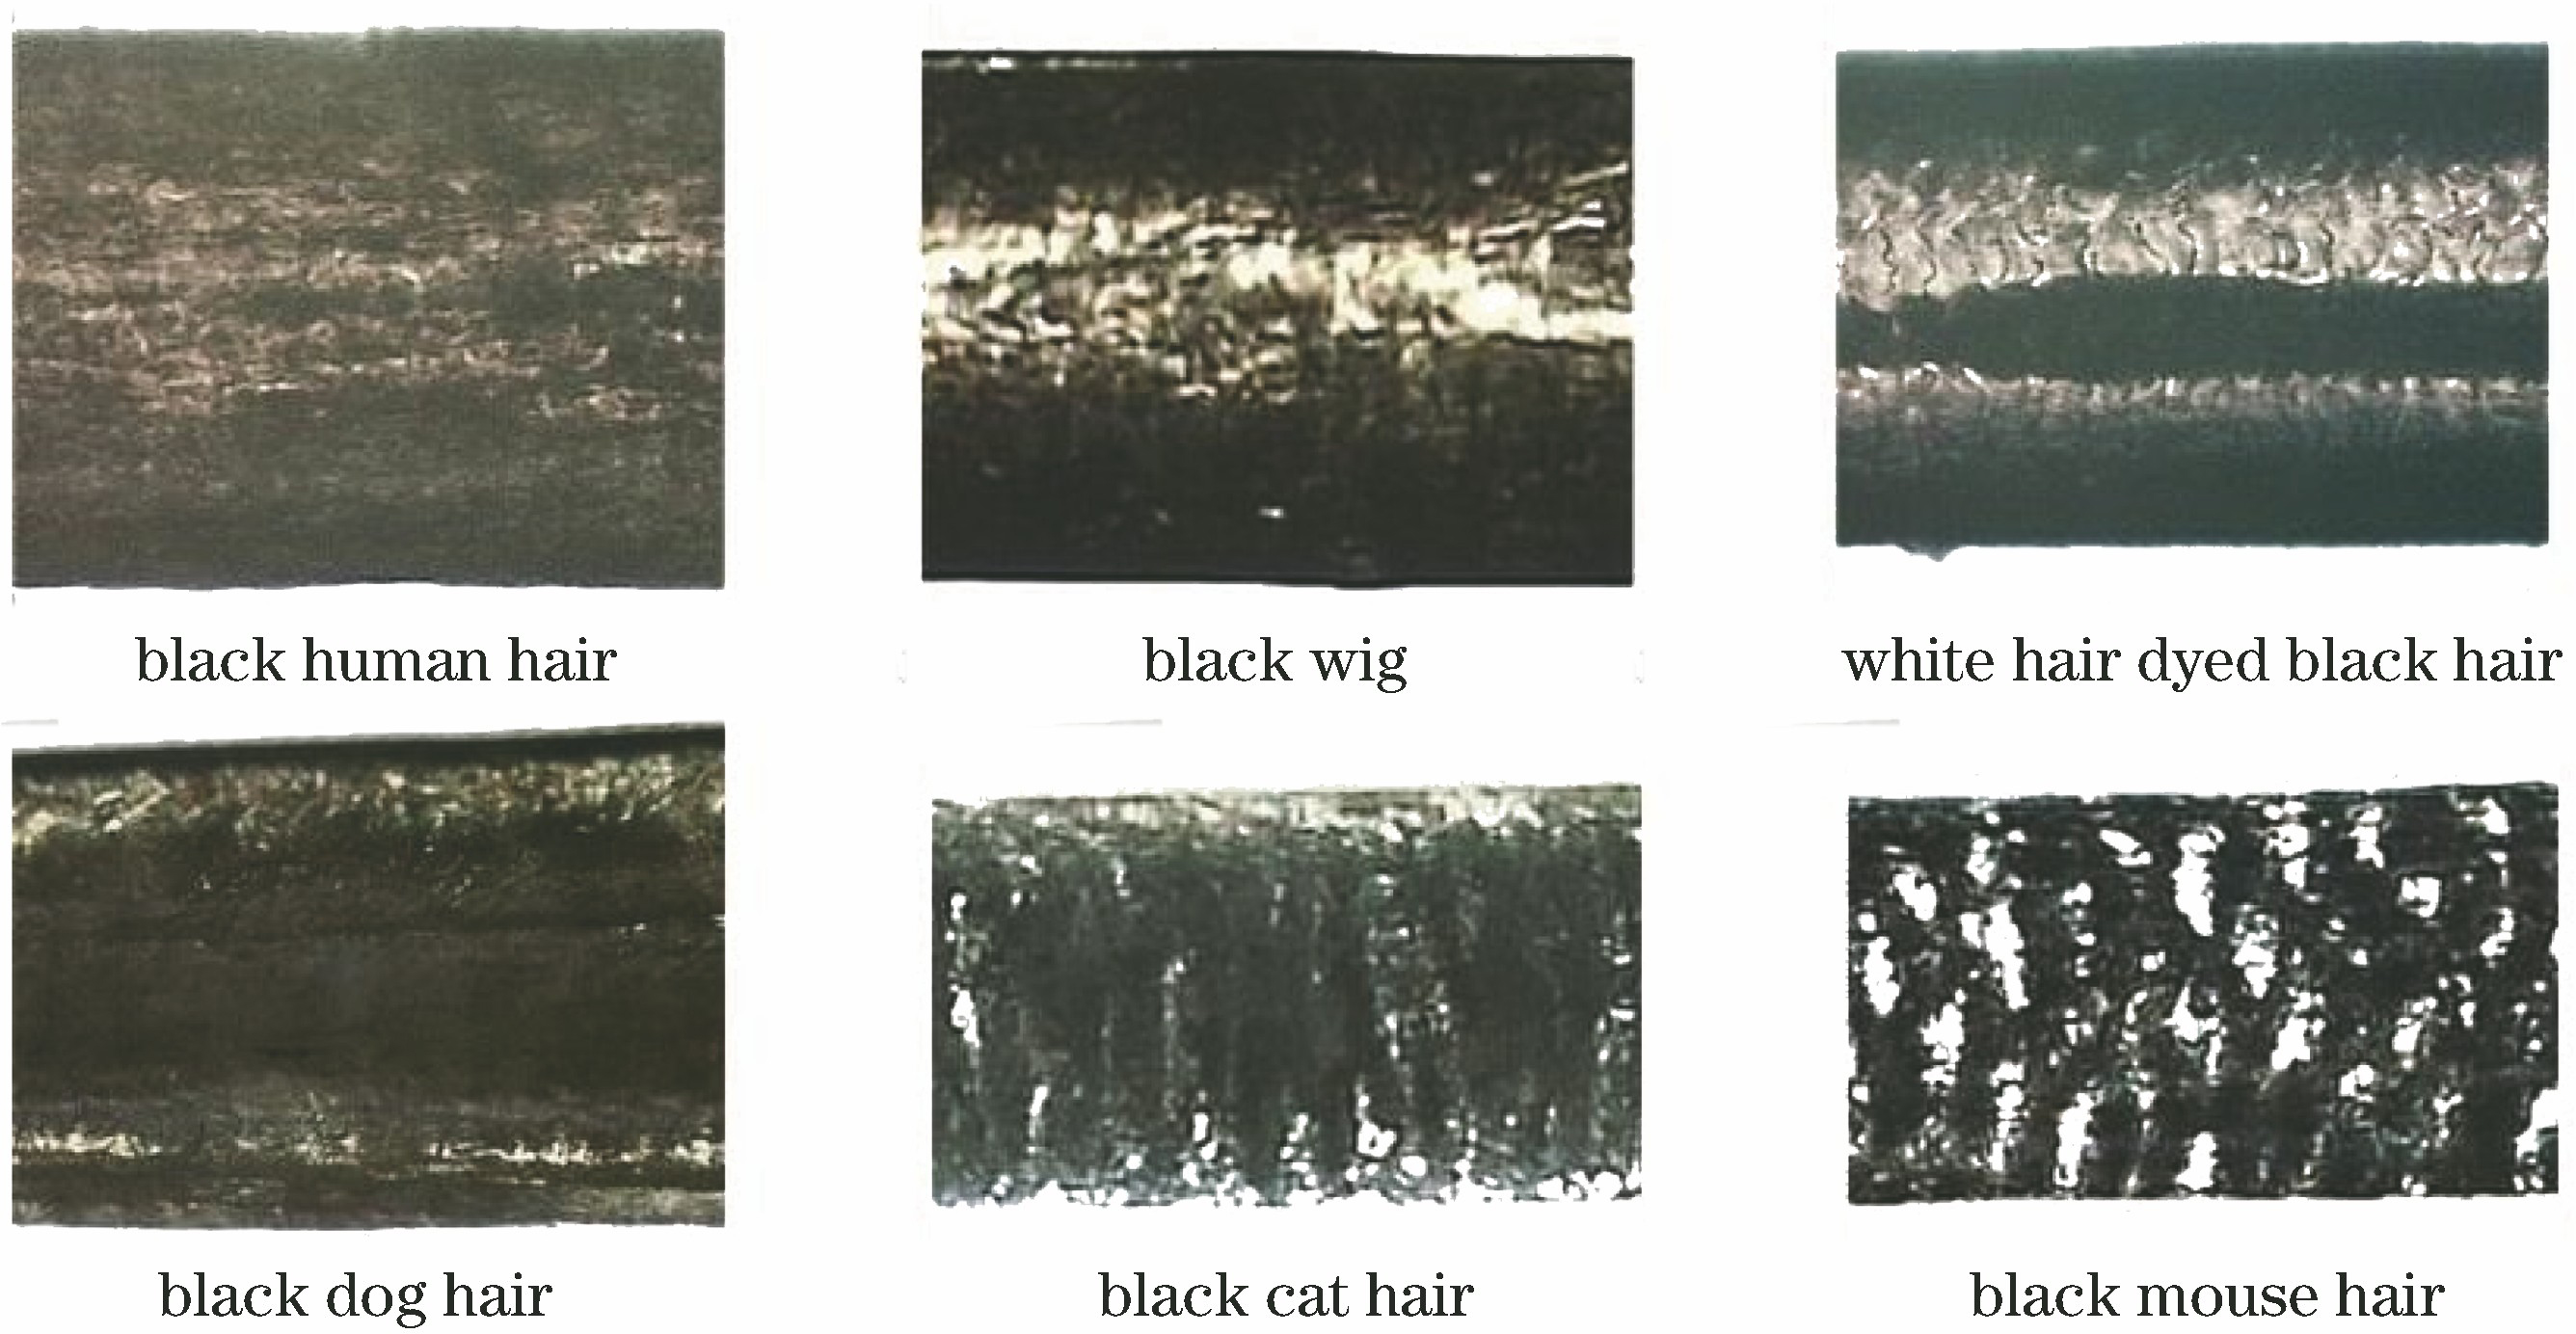 Examples of sample dataset images